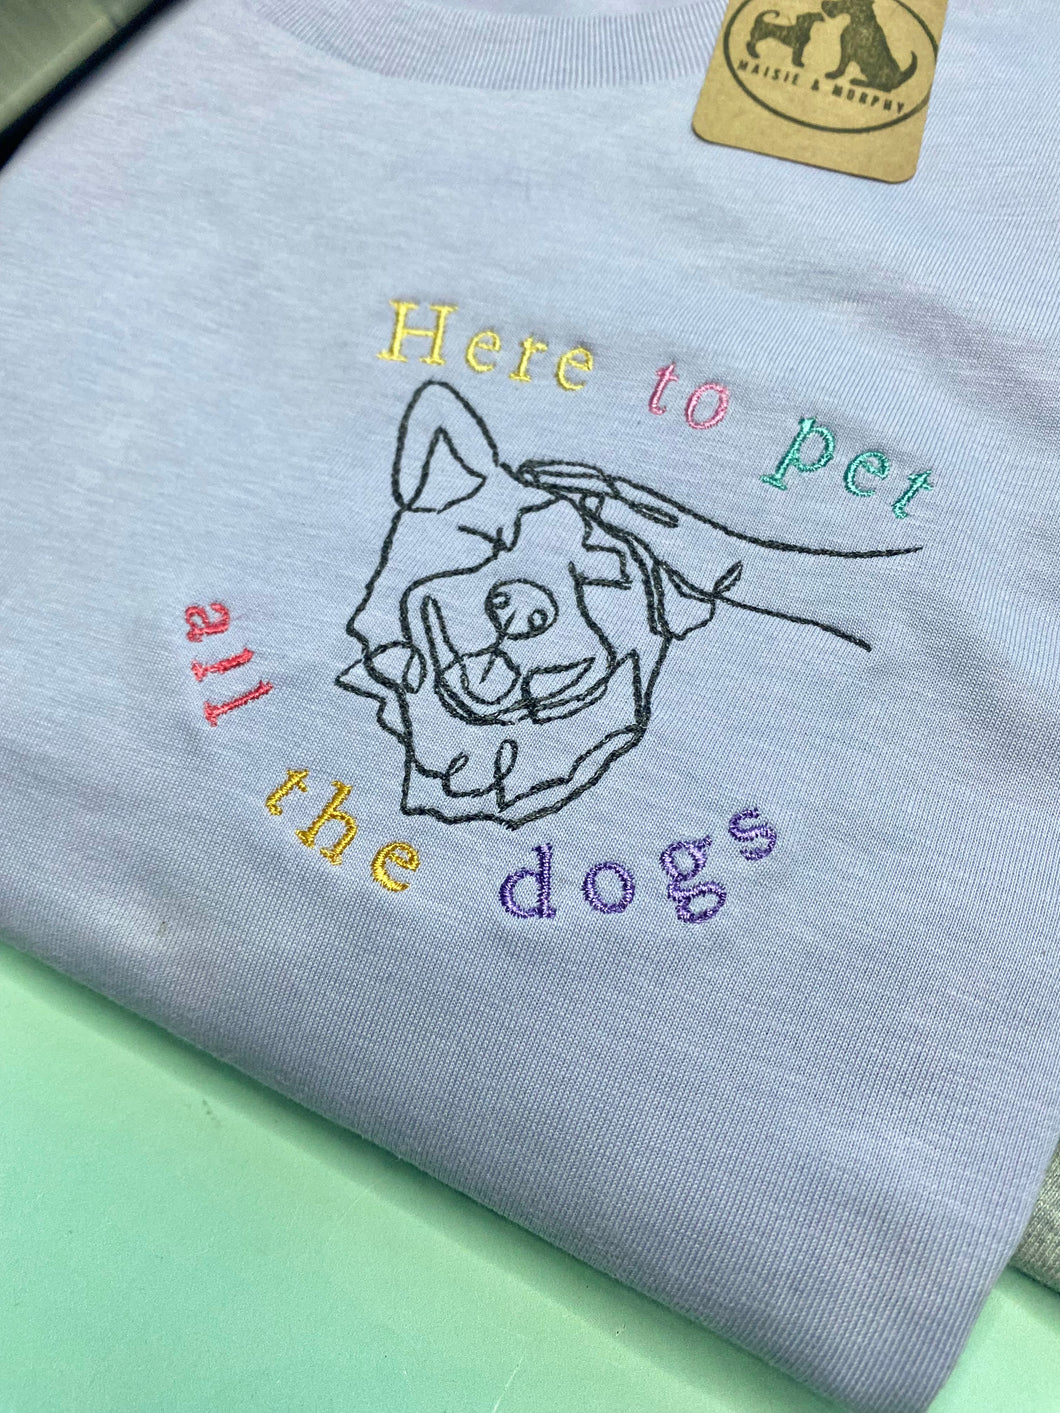 ‘Here to pet all the dogs’ Organic T-Shirt- Gifts for dog lovers and owners.